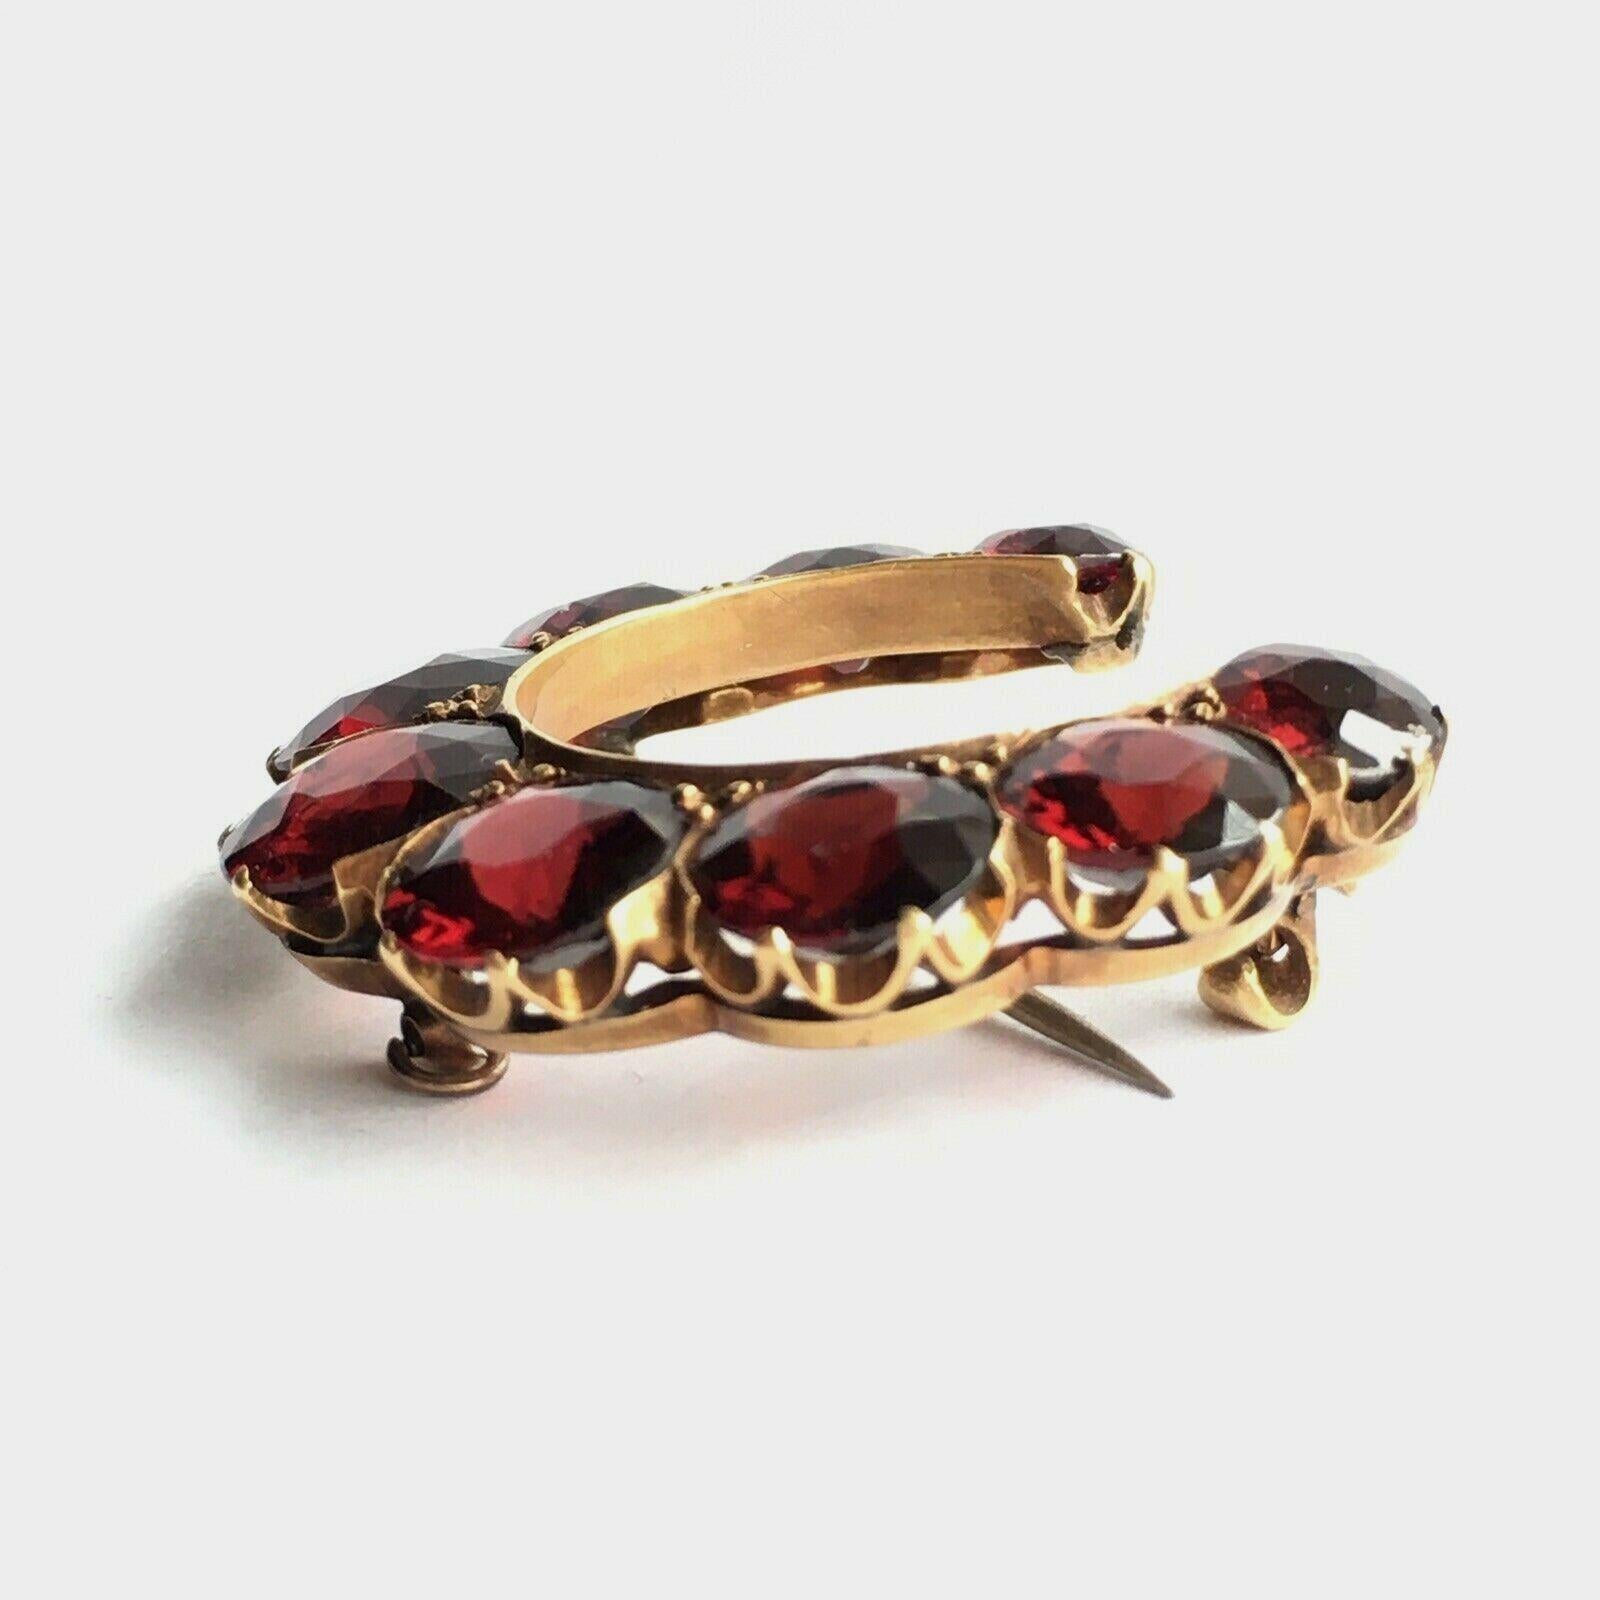 American Antique Edwardian/ post Gilded Age 14K Rosi Yellow Gold Brooch circa 1900s, nine pieces of Old European Cut Natural Pyrope Garnet 6.5 mm to 9 mm in excellent condition considering 100 Yrs of age, approximate size of 1 1/4 inch by 1 3/4